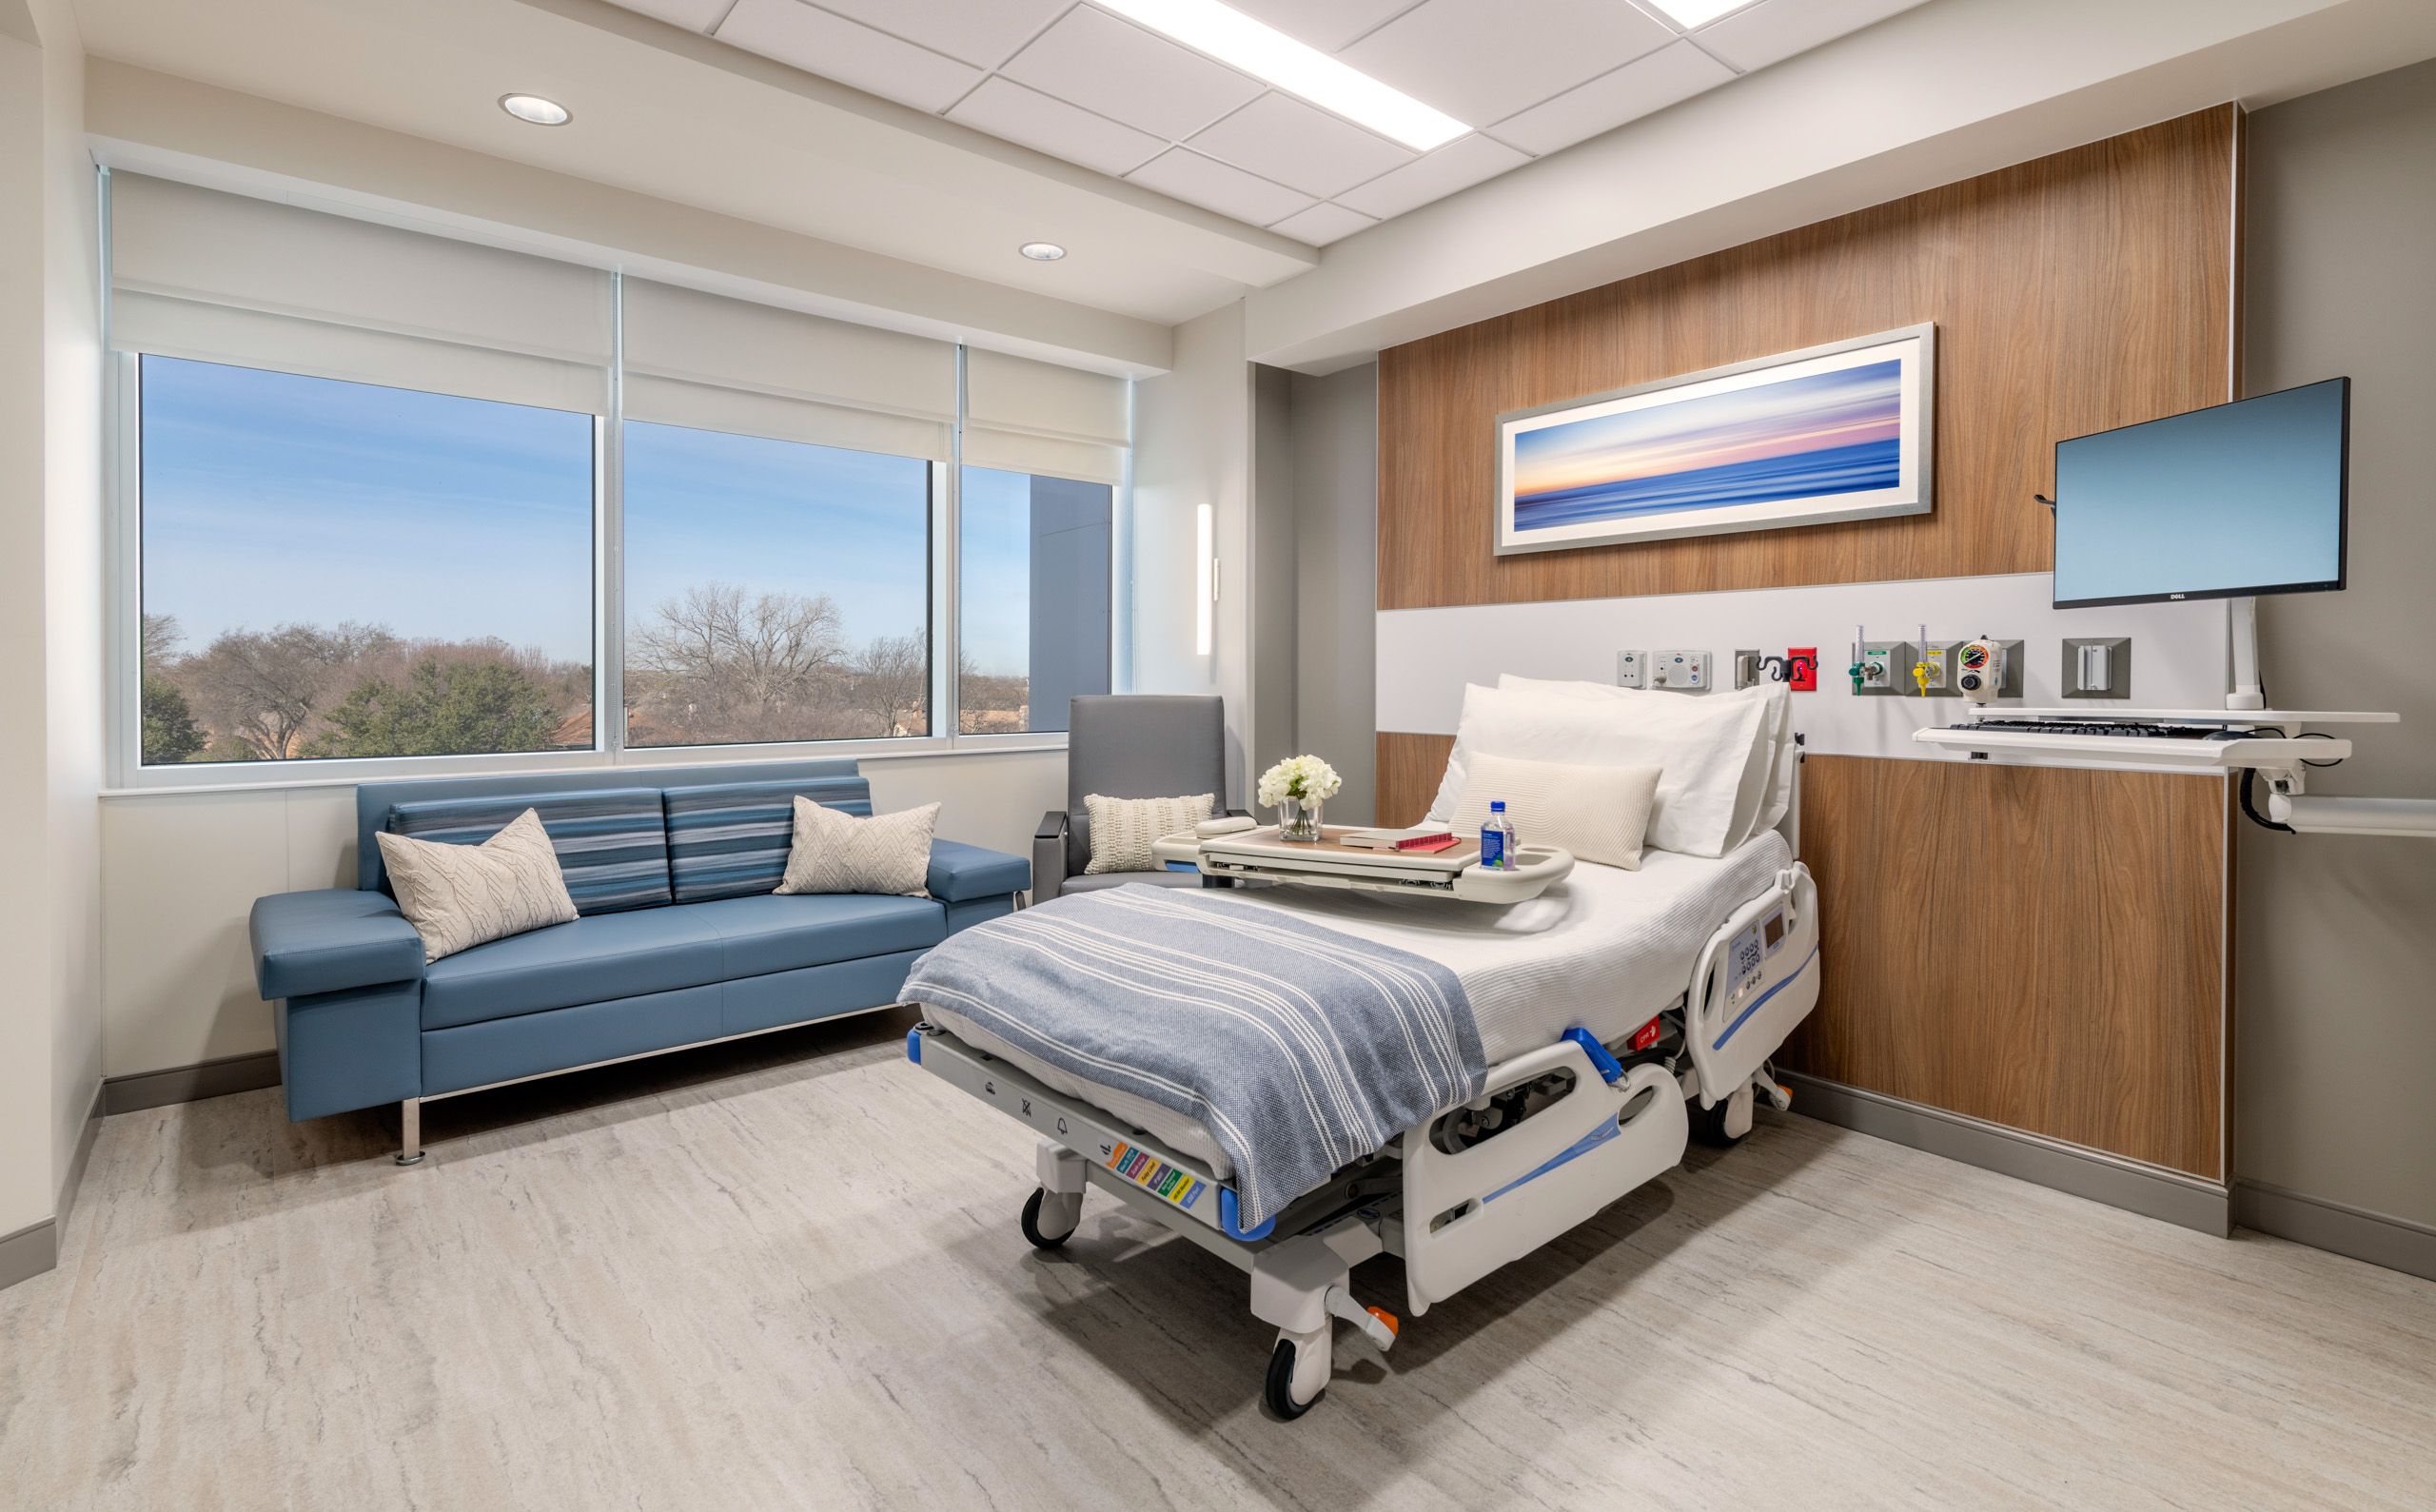 Lake Pointe Medical Center Patient Room